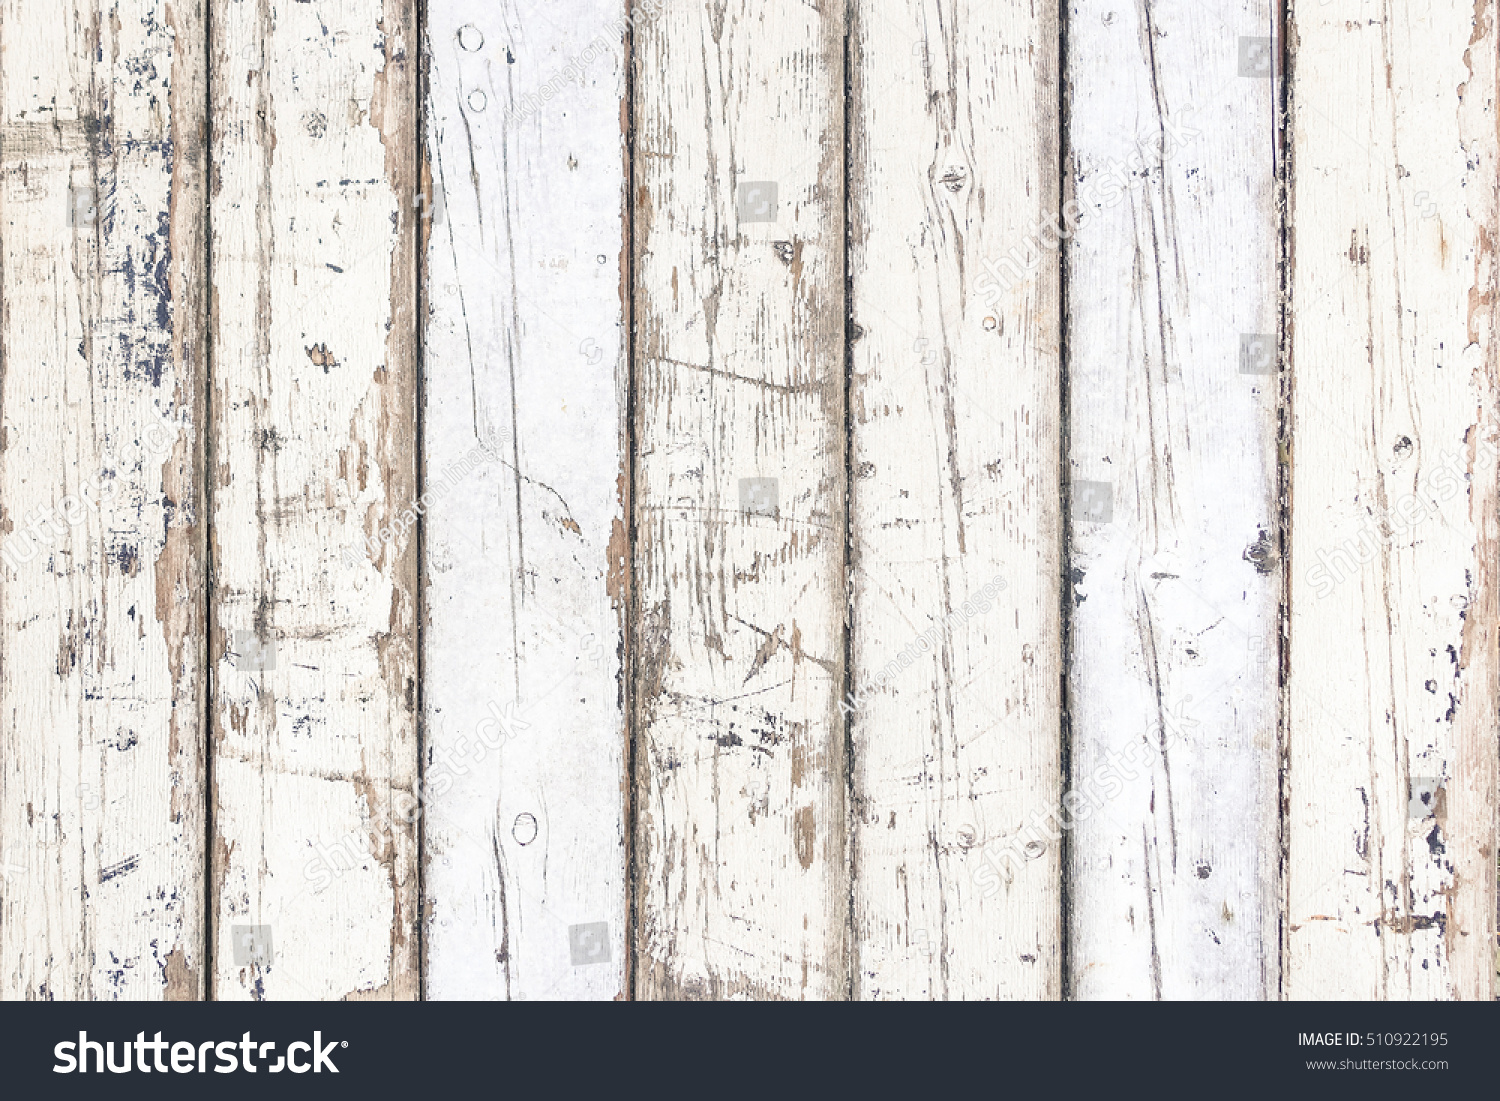 Laeacco Weathered Whitish Wood Plank Photography Background 10x7ft Vinyl Rustic Grunge Vertical Striped Wooden Board Backdrops Children Adults Pets Product Rural Style Photo Shooting